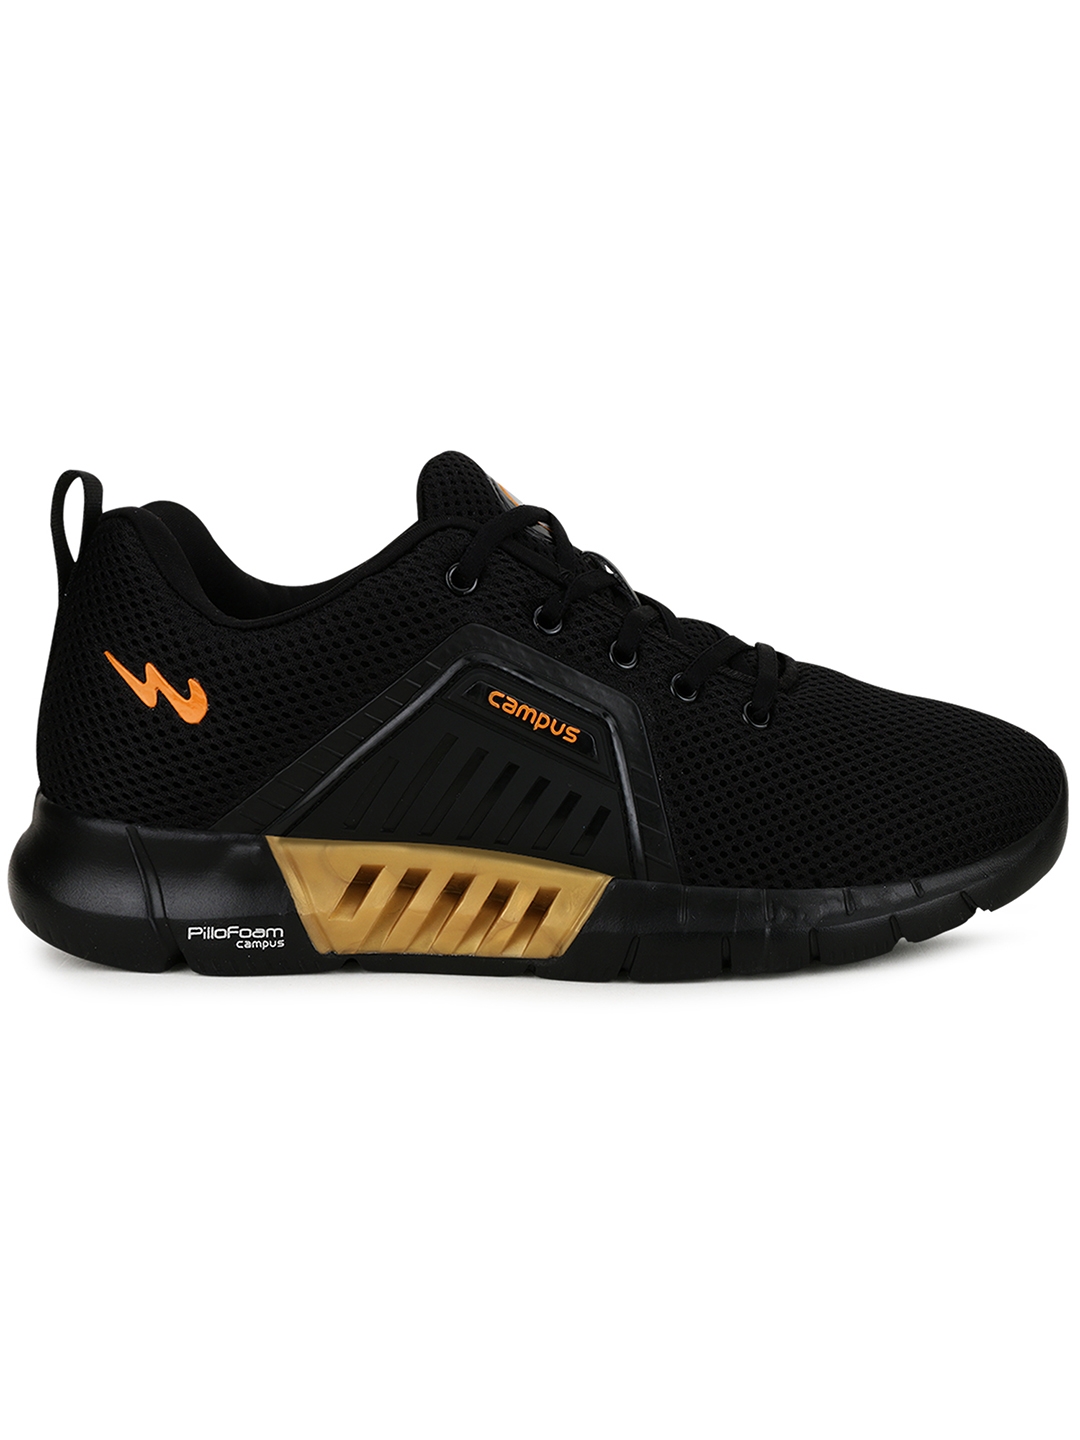 Campus Shoes | Black Center Running Shoes